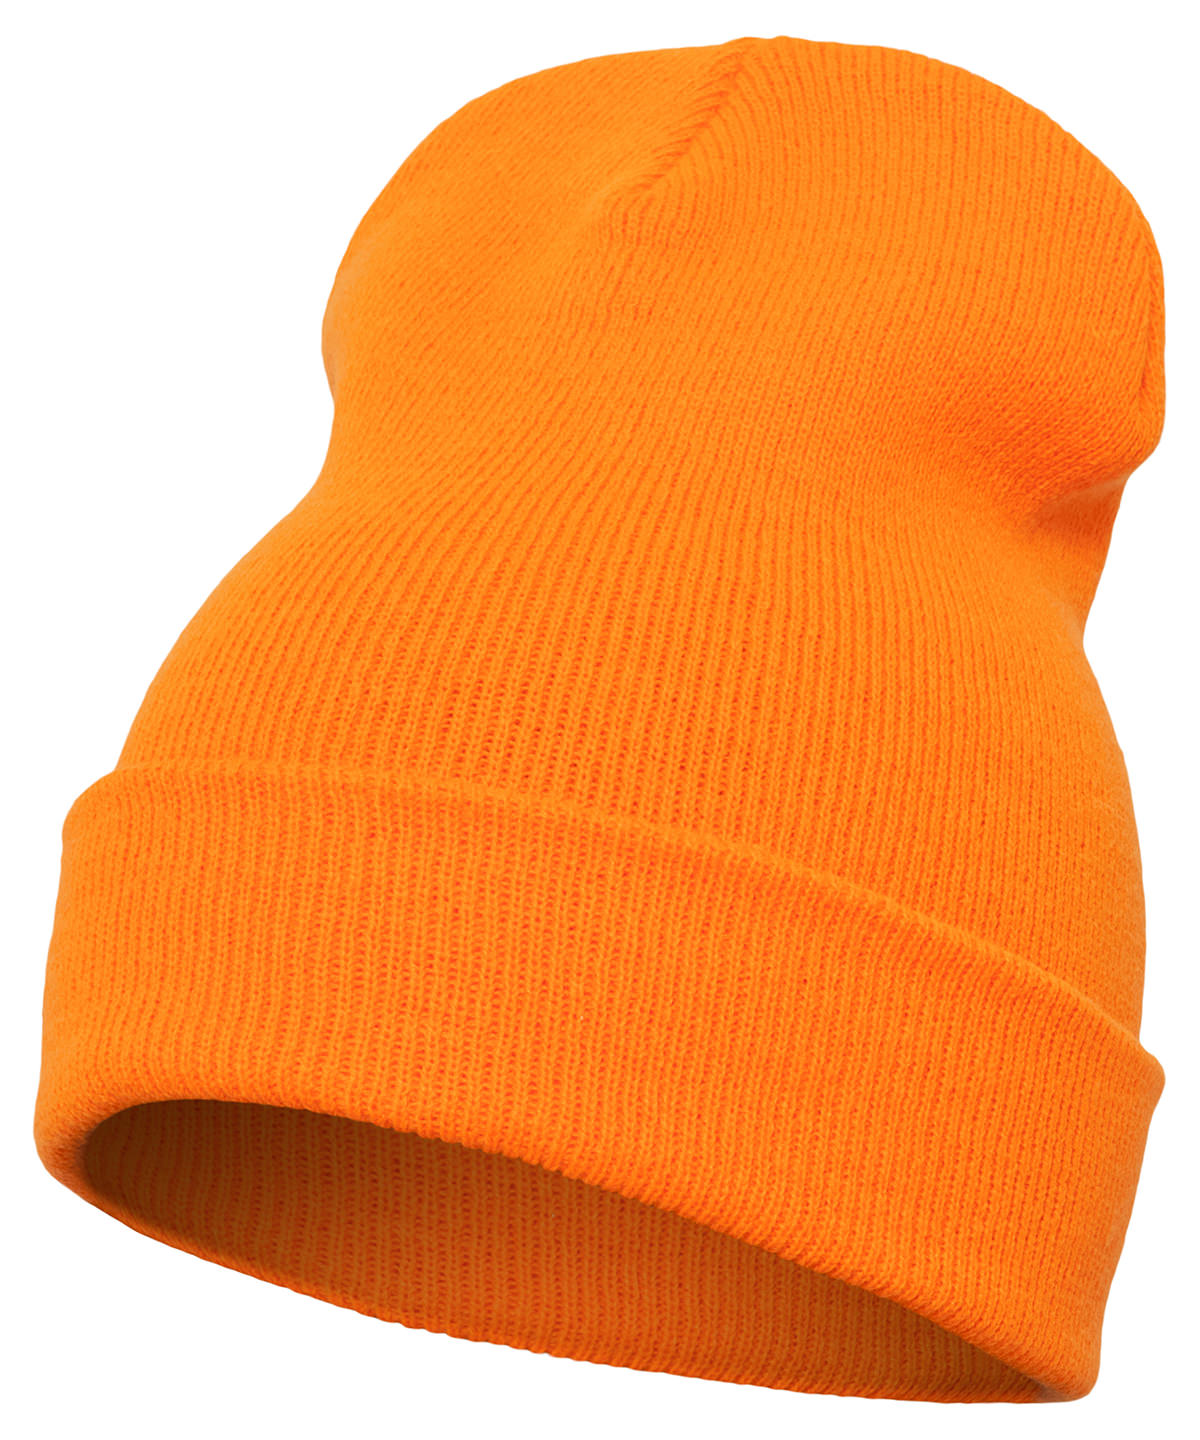 Blaze Orange - Heavyweight long beanie (1501KC) Hats Flexfit by Yupoong Headwear, Must Haves, New Colours for 2023, Winter Essentials Schoolwear Centres